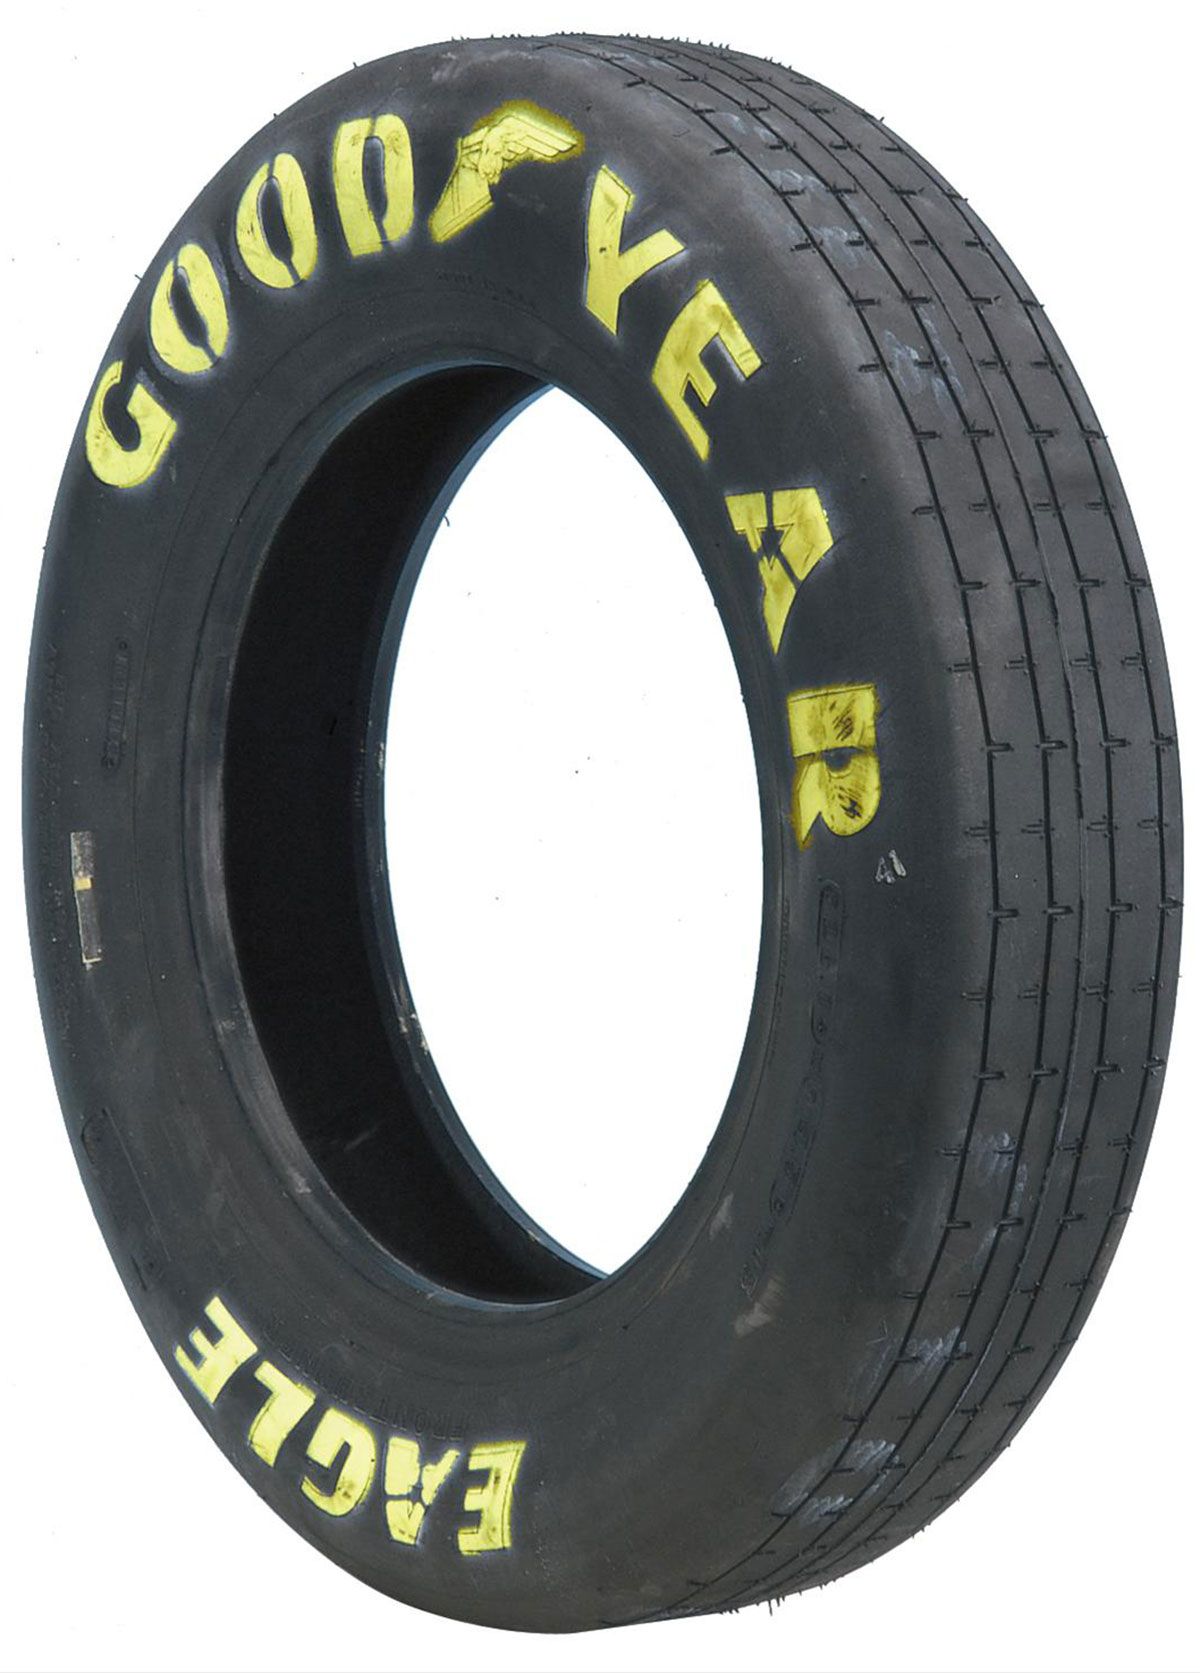 GY1445 - GOODYEAR 22 x 2.5-17 FRONT TYR